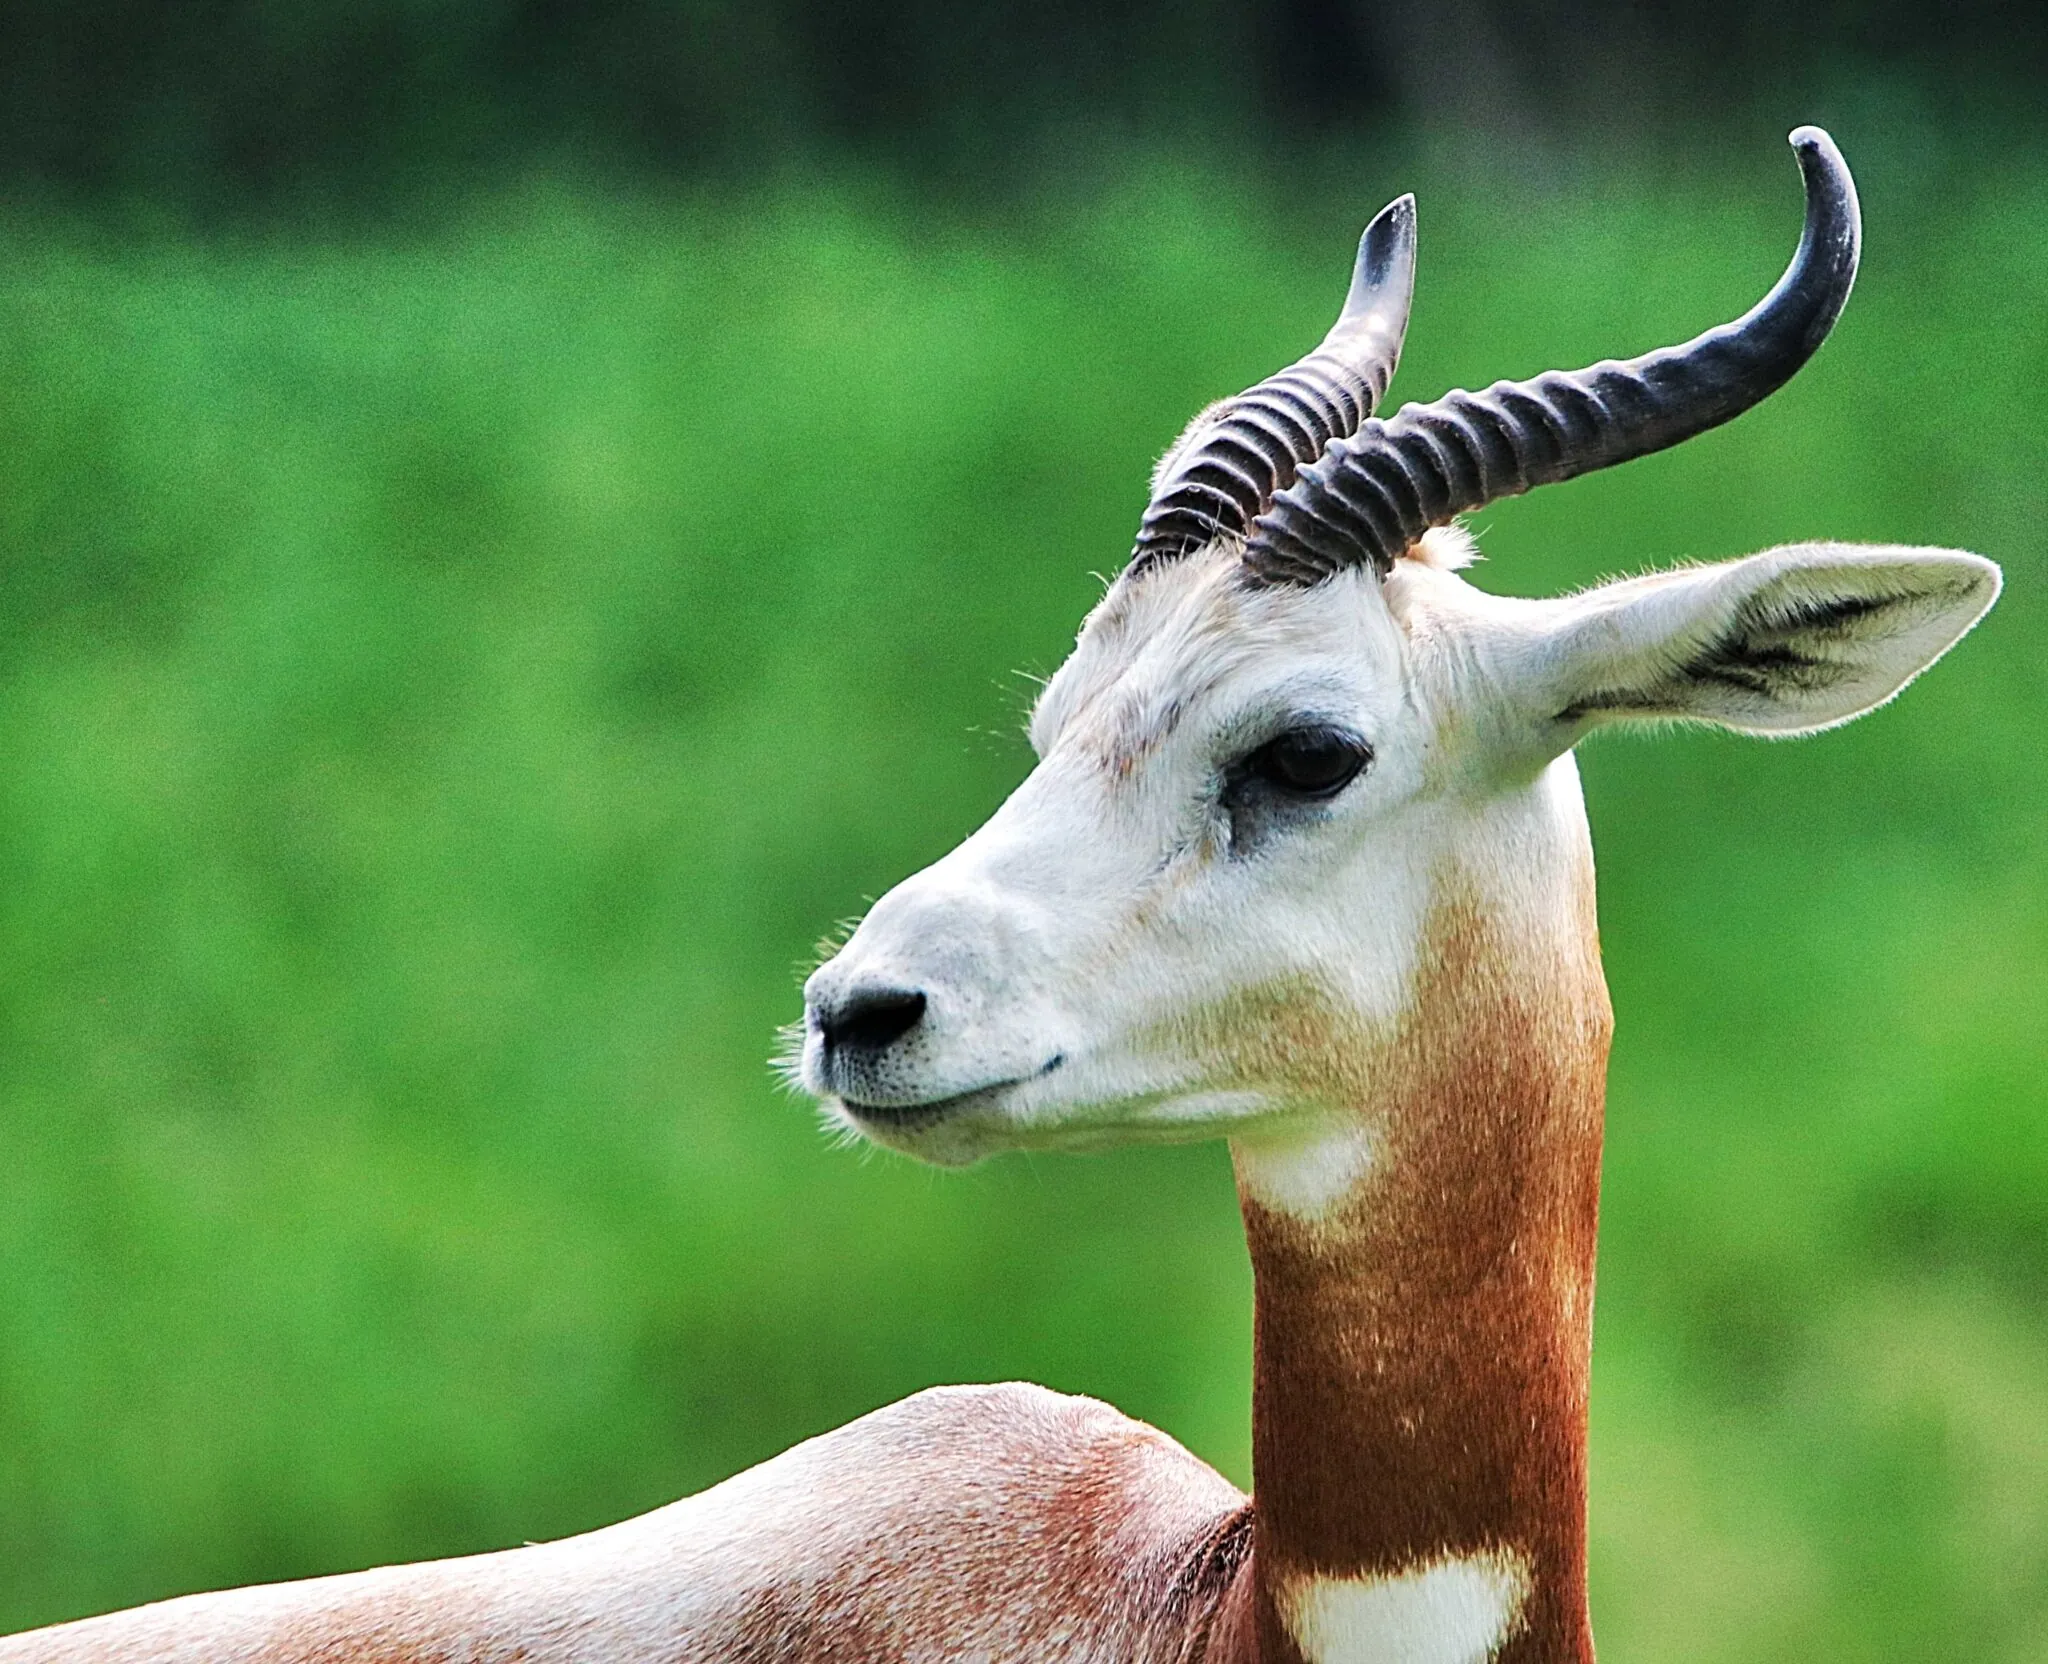 Picture of a gazelle